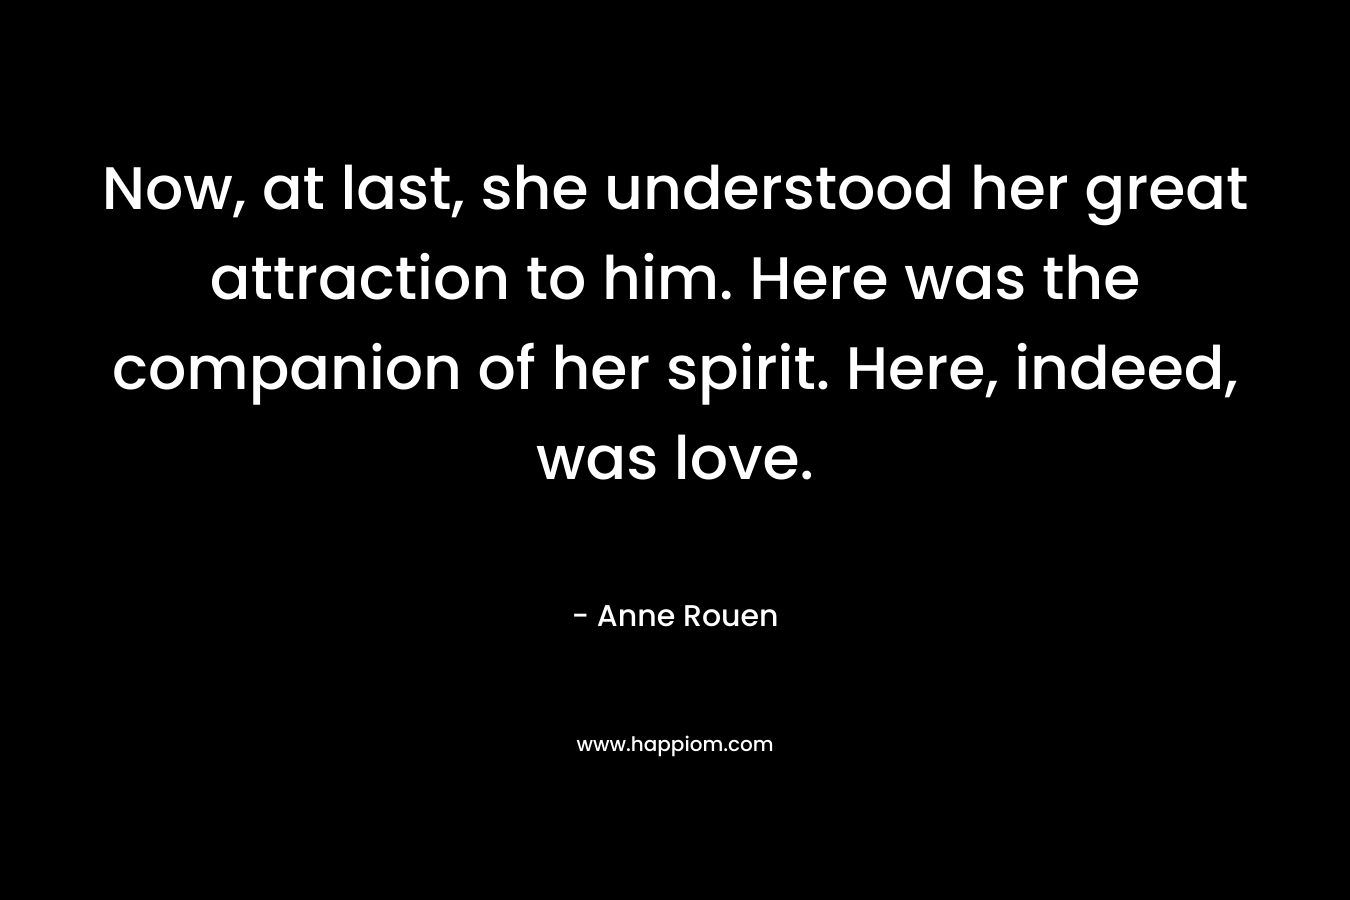 Now, at last, she understood her great attraction to him. Here was the companion of her spirit. Here, indeed, was love. – Anne Rouen